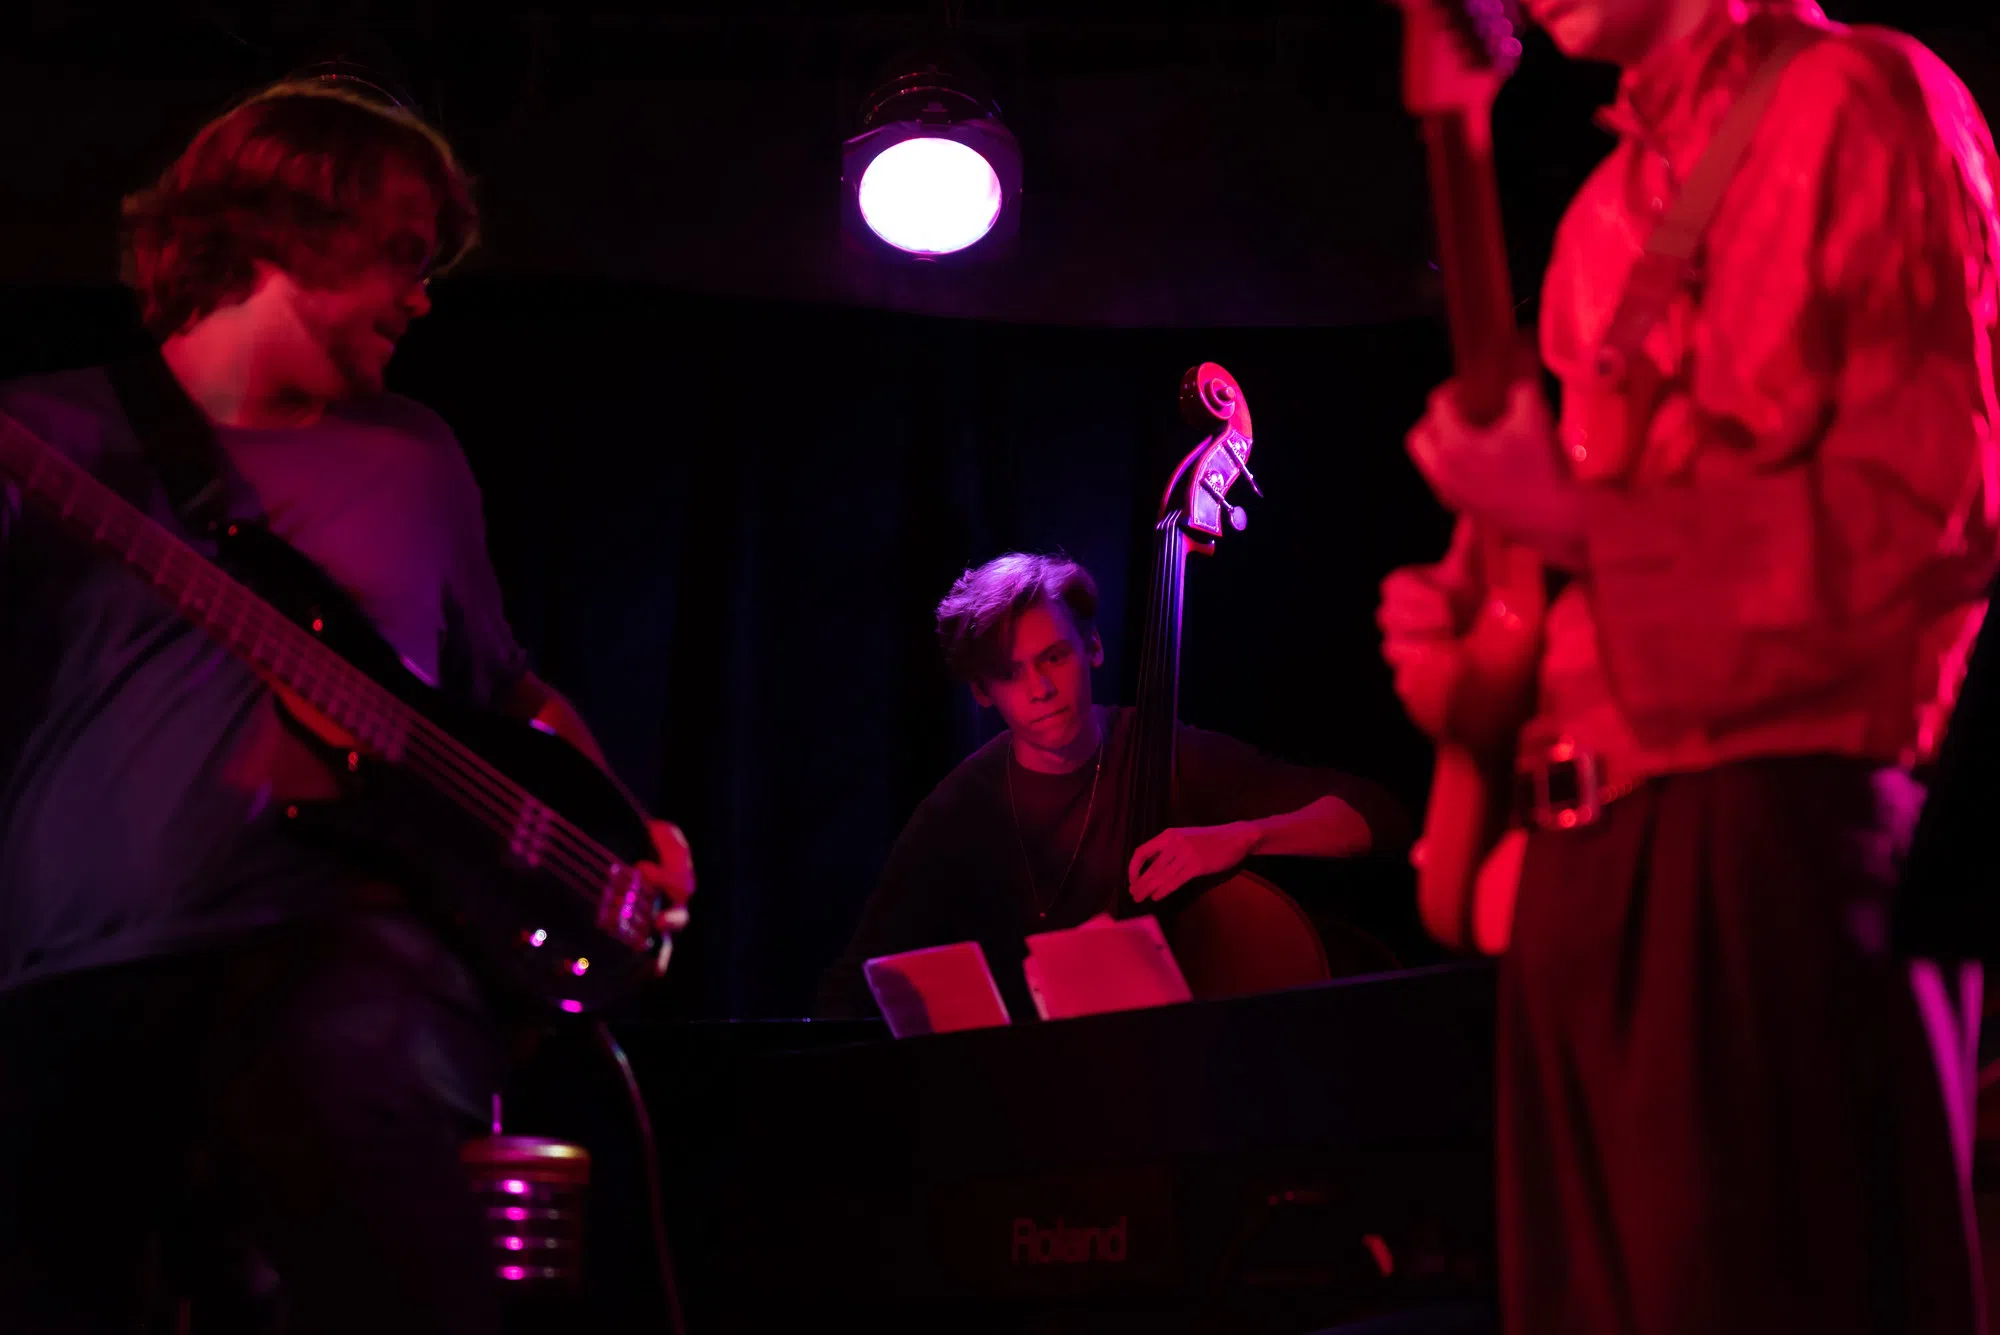 An upright bass player hits notes in the red lighting of Oberlin's nightclub venue, the Sco